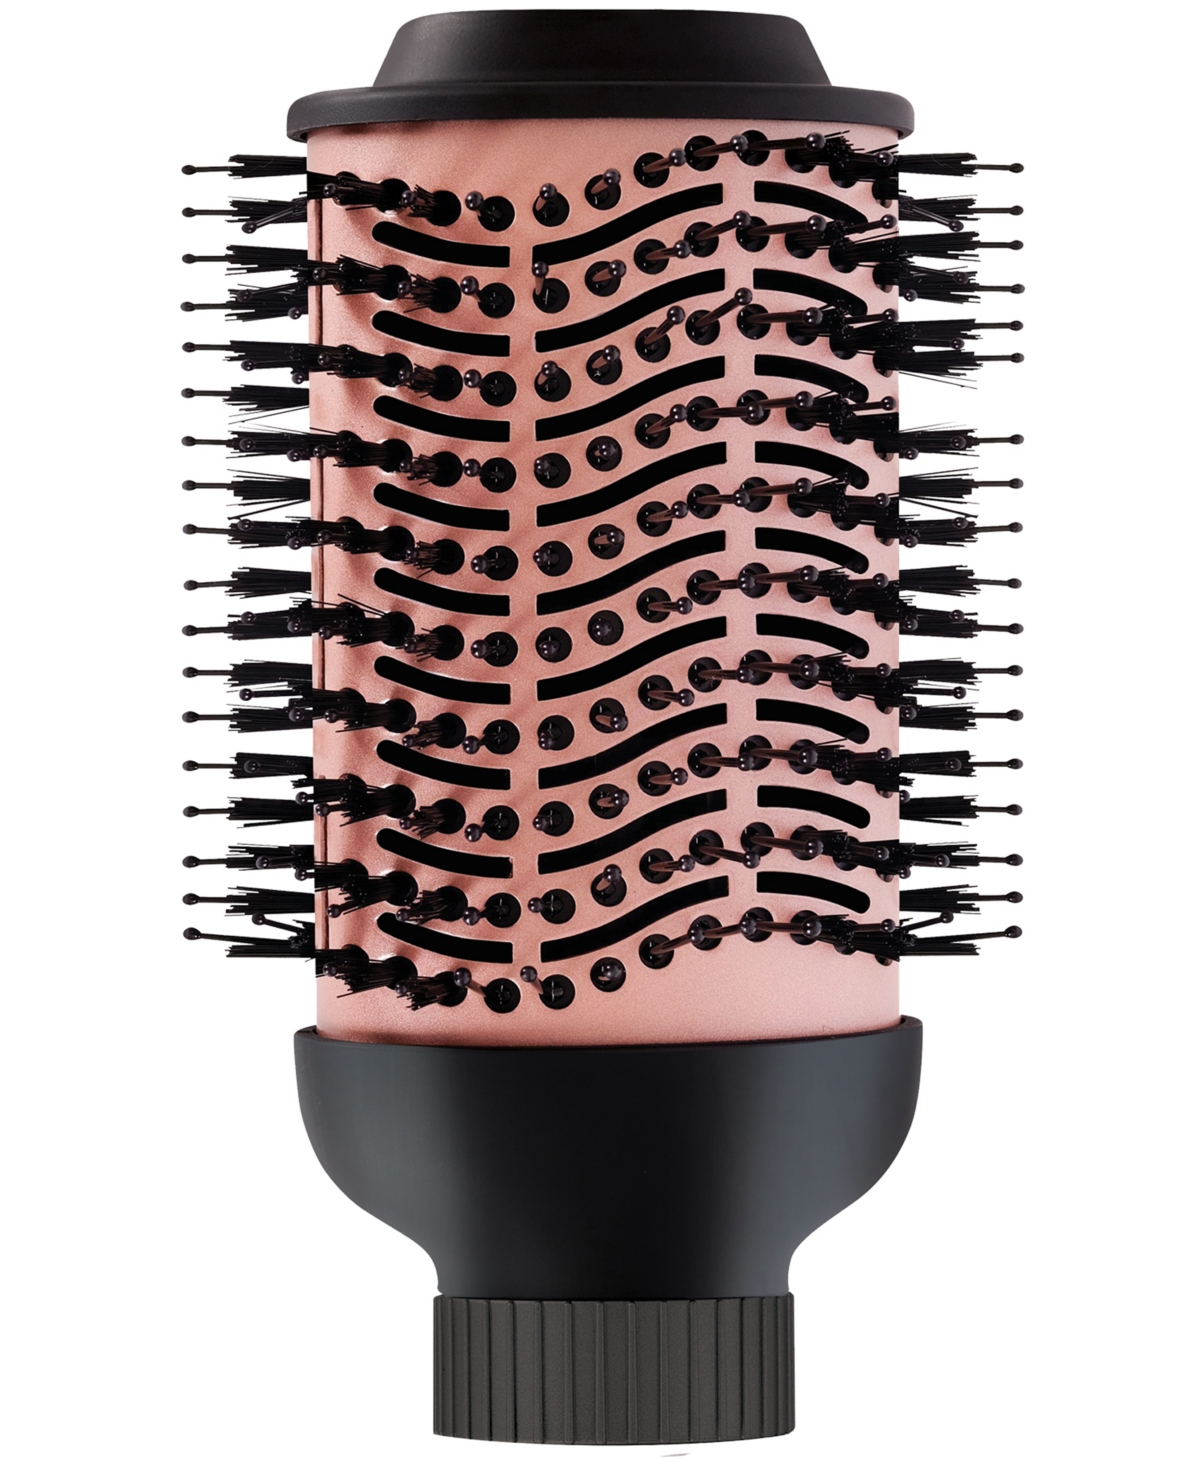 Interchangeable 3" Blowout Brush Head Attachment - Black And Rose Gold